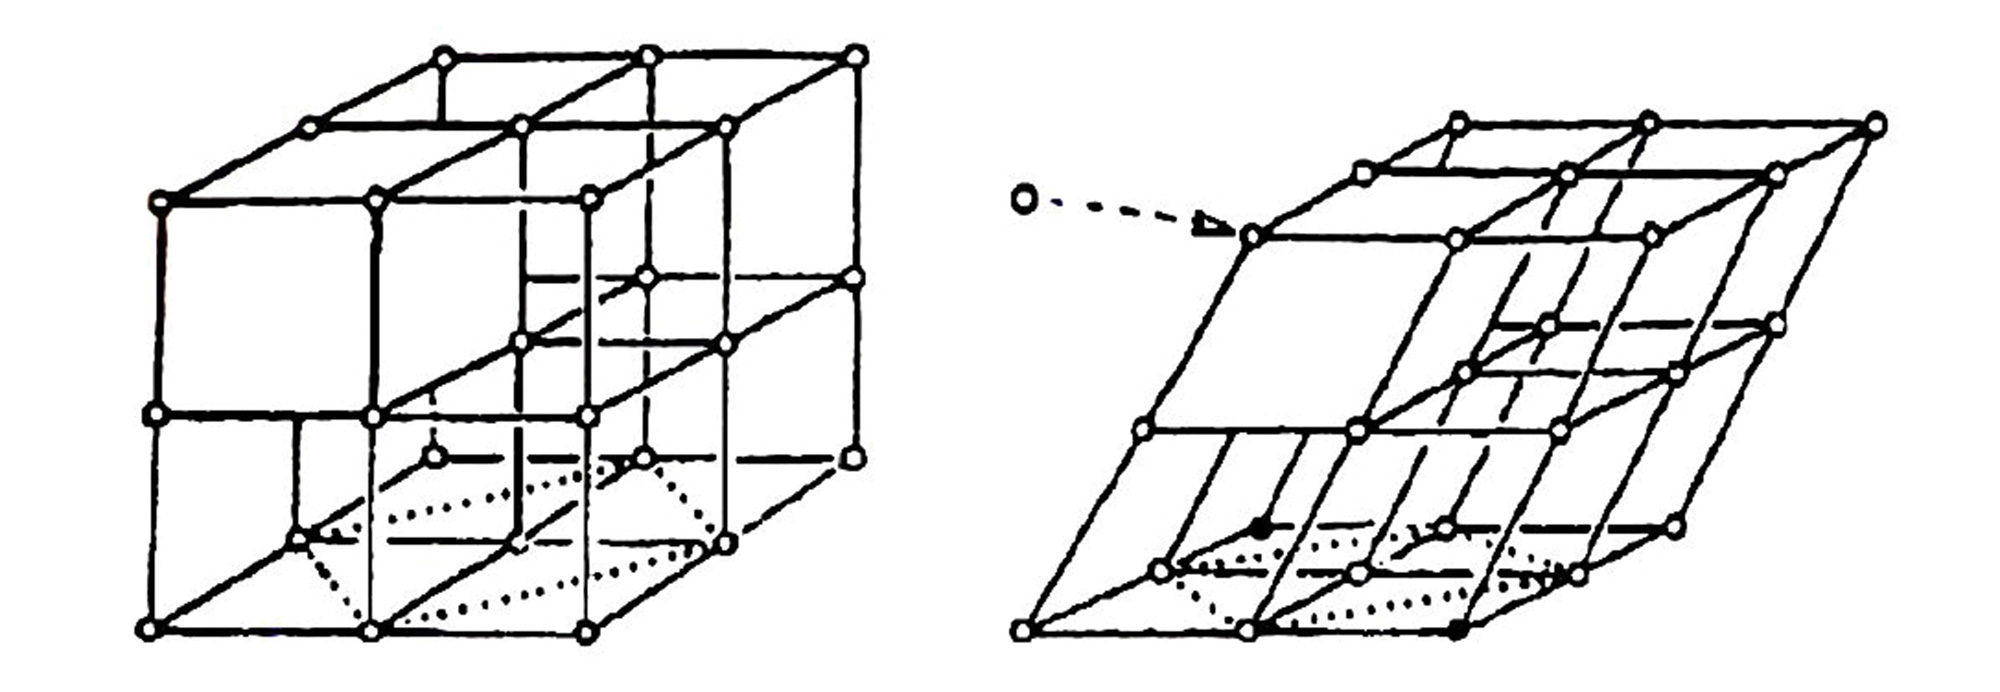 Two diagrams, one of a standard cubic lattice, and one of a cubic lattice pushed askew to create a rhombic lattice.